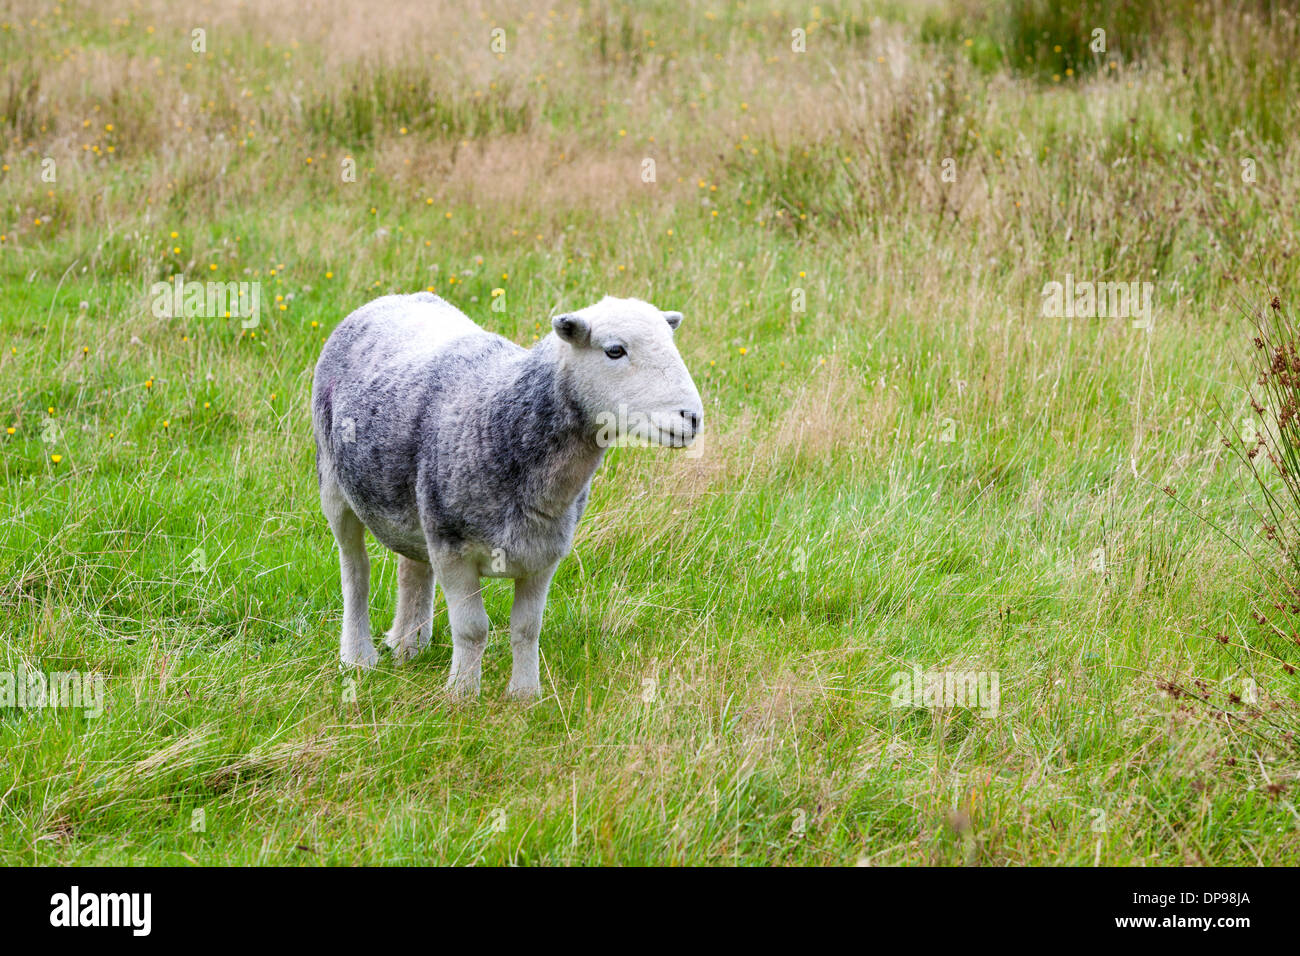 Young sheep on pastured land Stock Photo